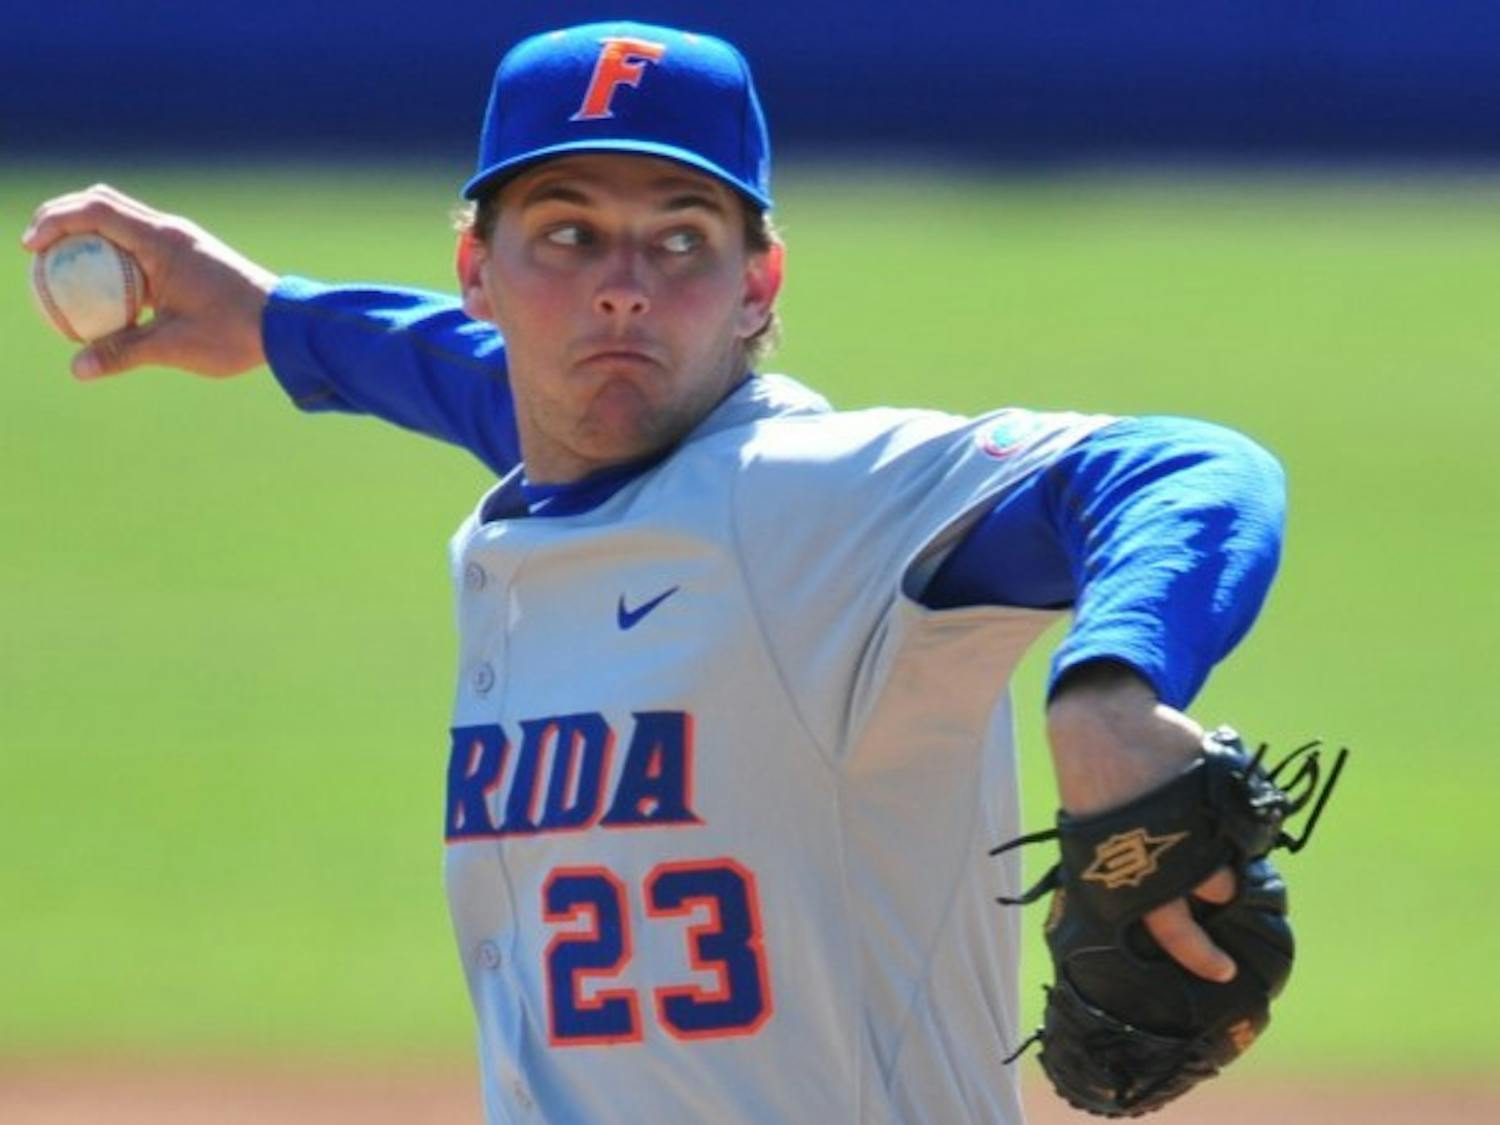 Gators sophomore pitcher Jonathan Crawford is in competition for the midweek starter’s role. He threw just 3.2 innings as a freshman last year.